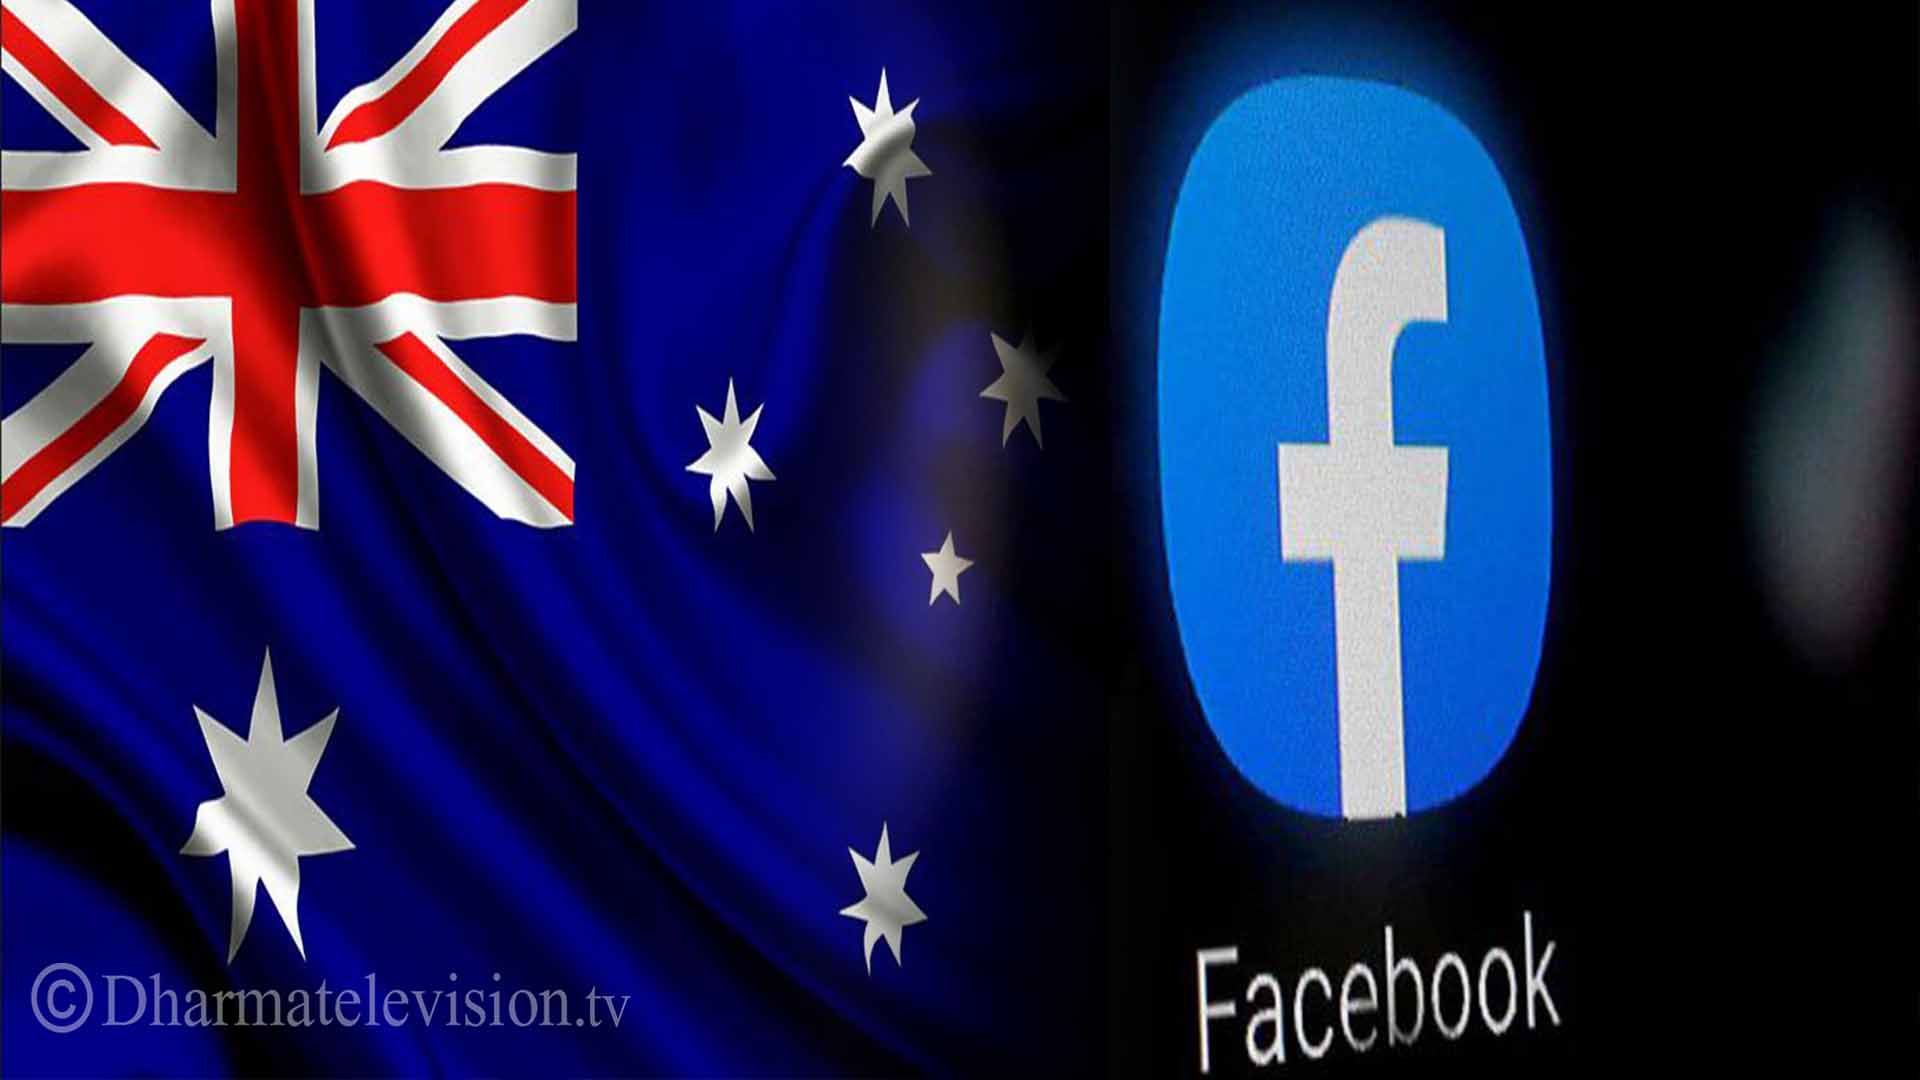 Law passed protesting Facebook and Google in Australia